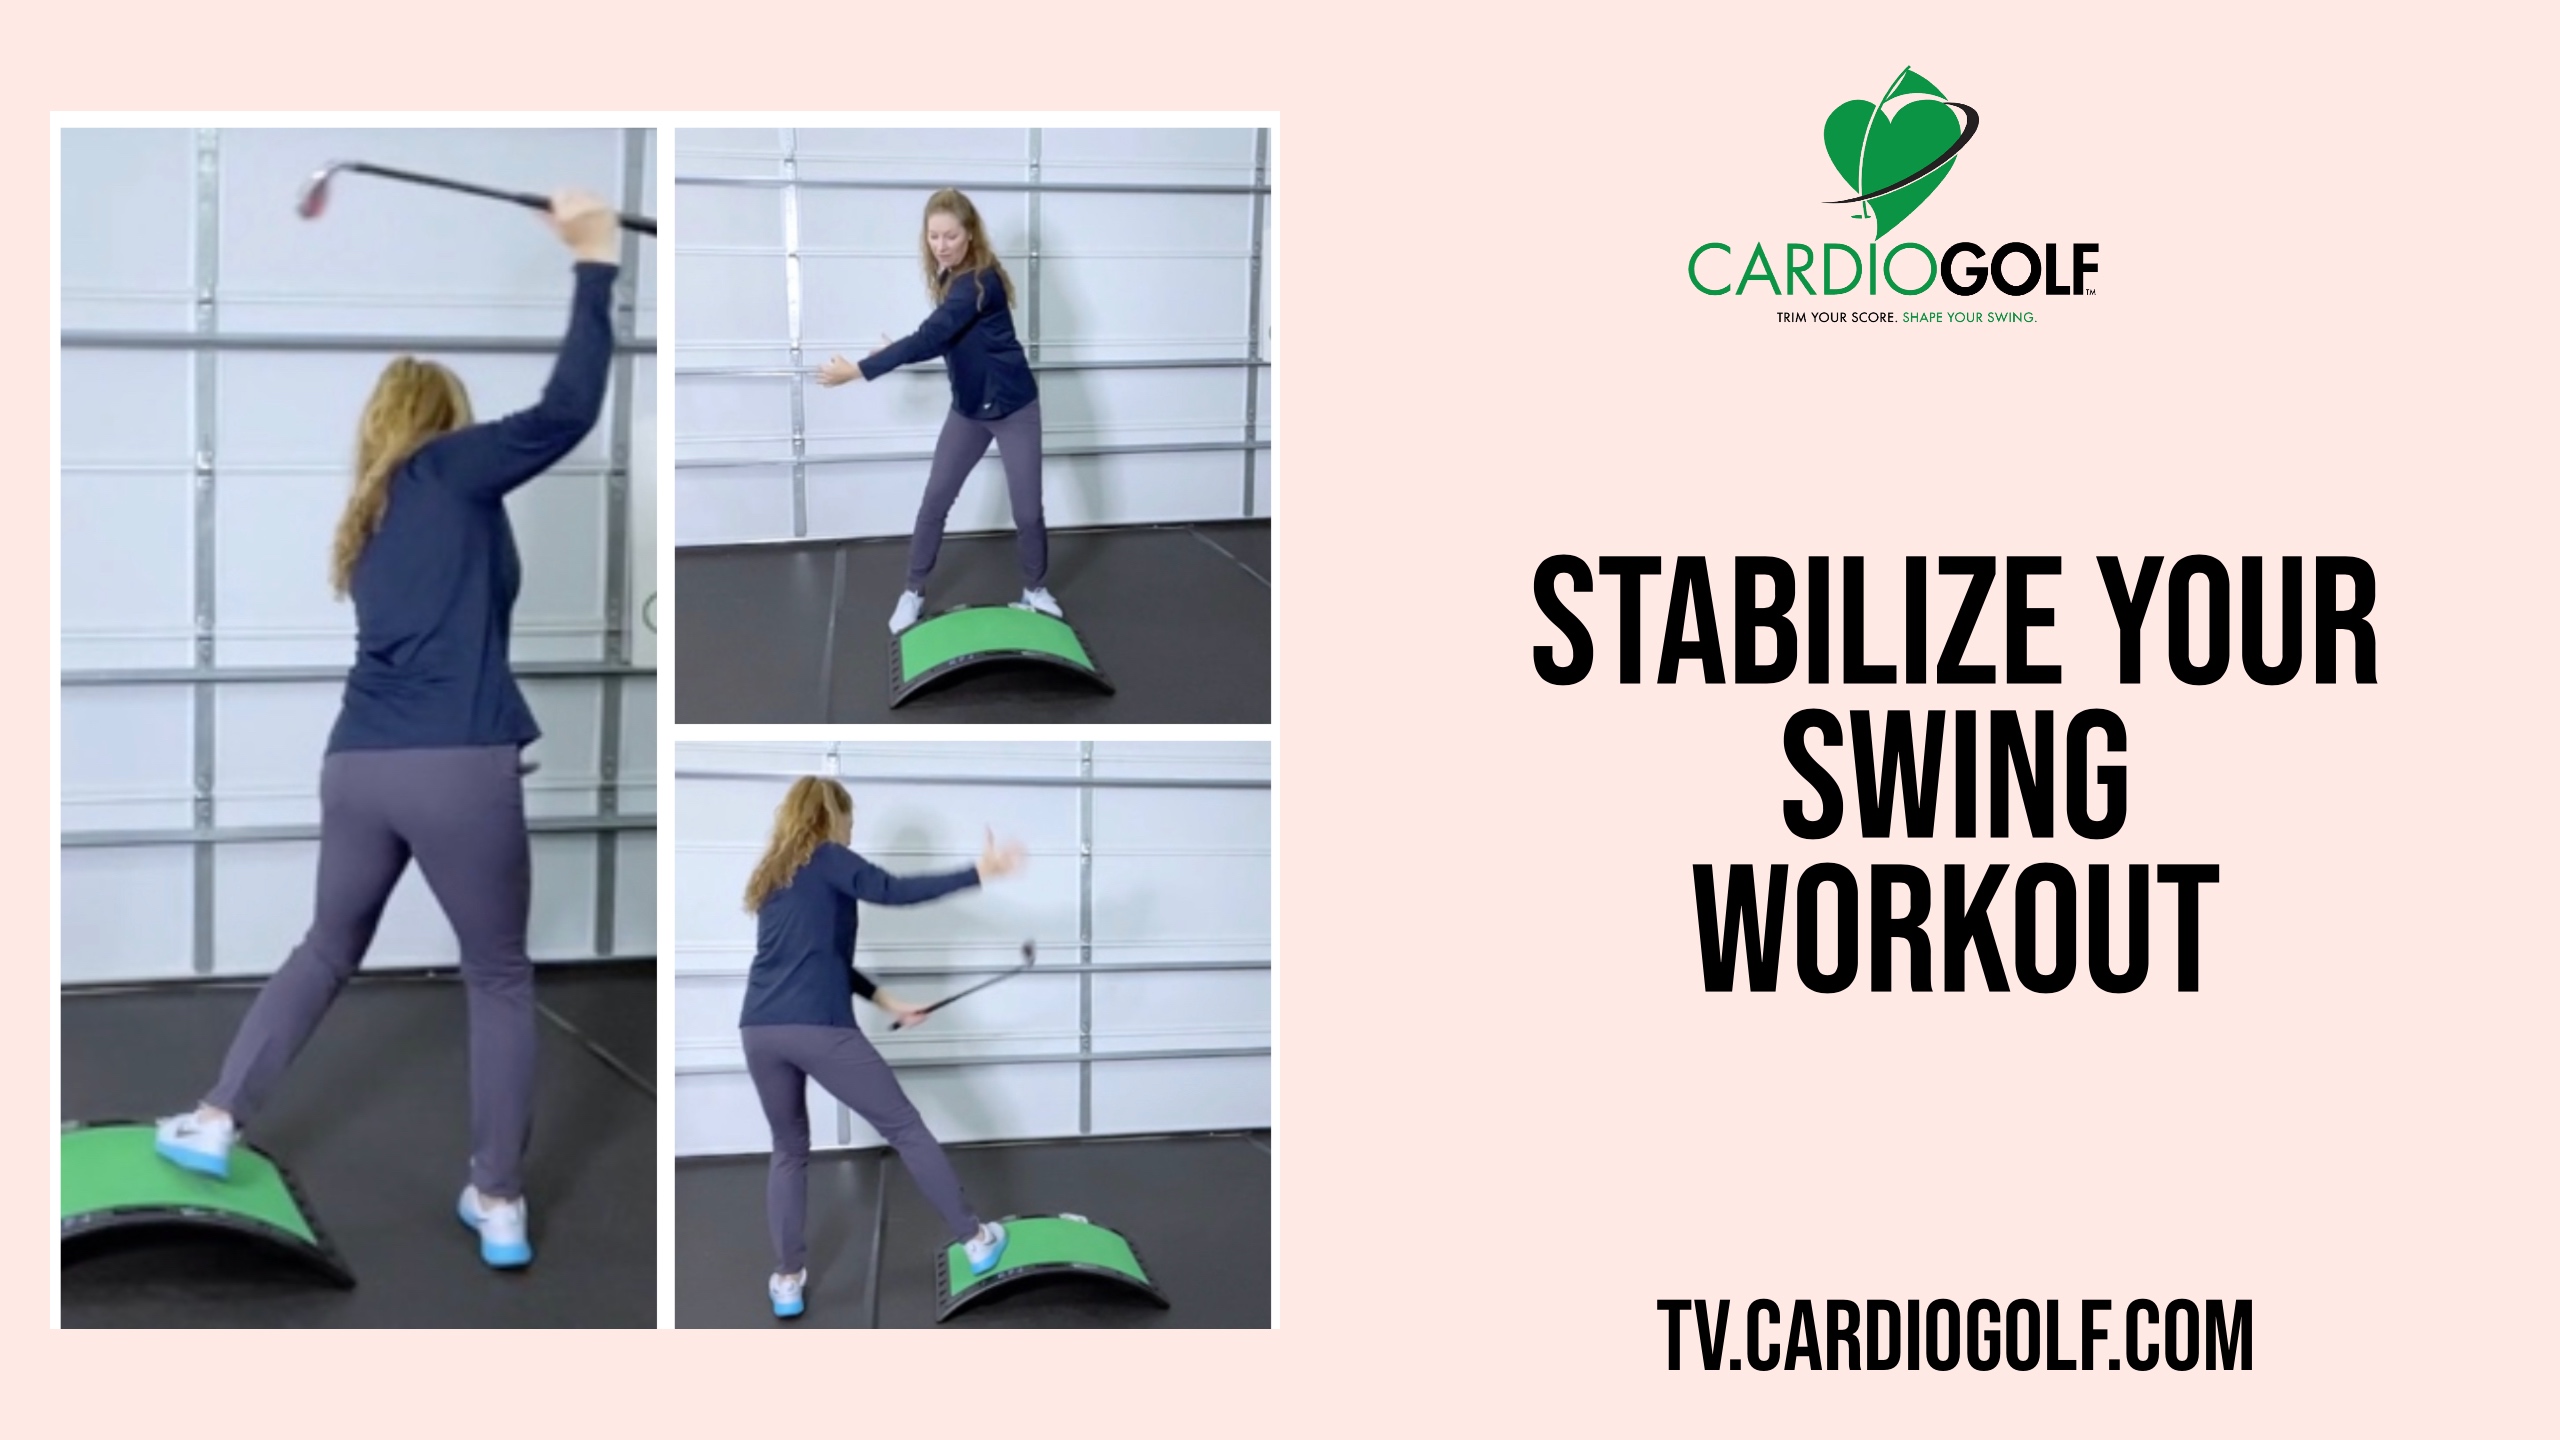  Stablize Your Swing Routine. CardioGolf.com 